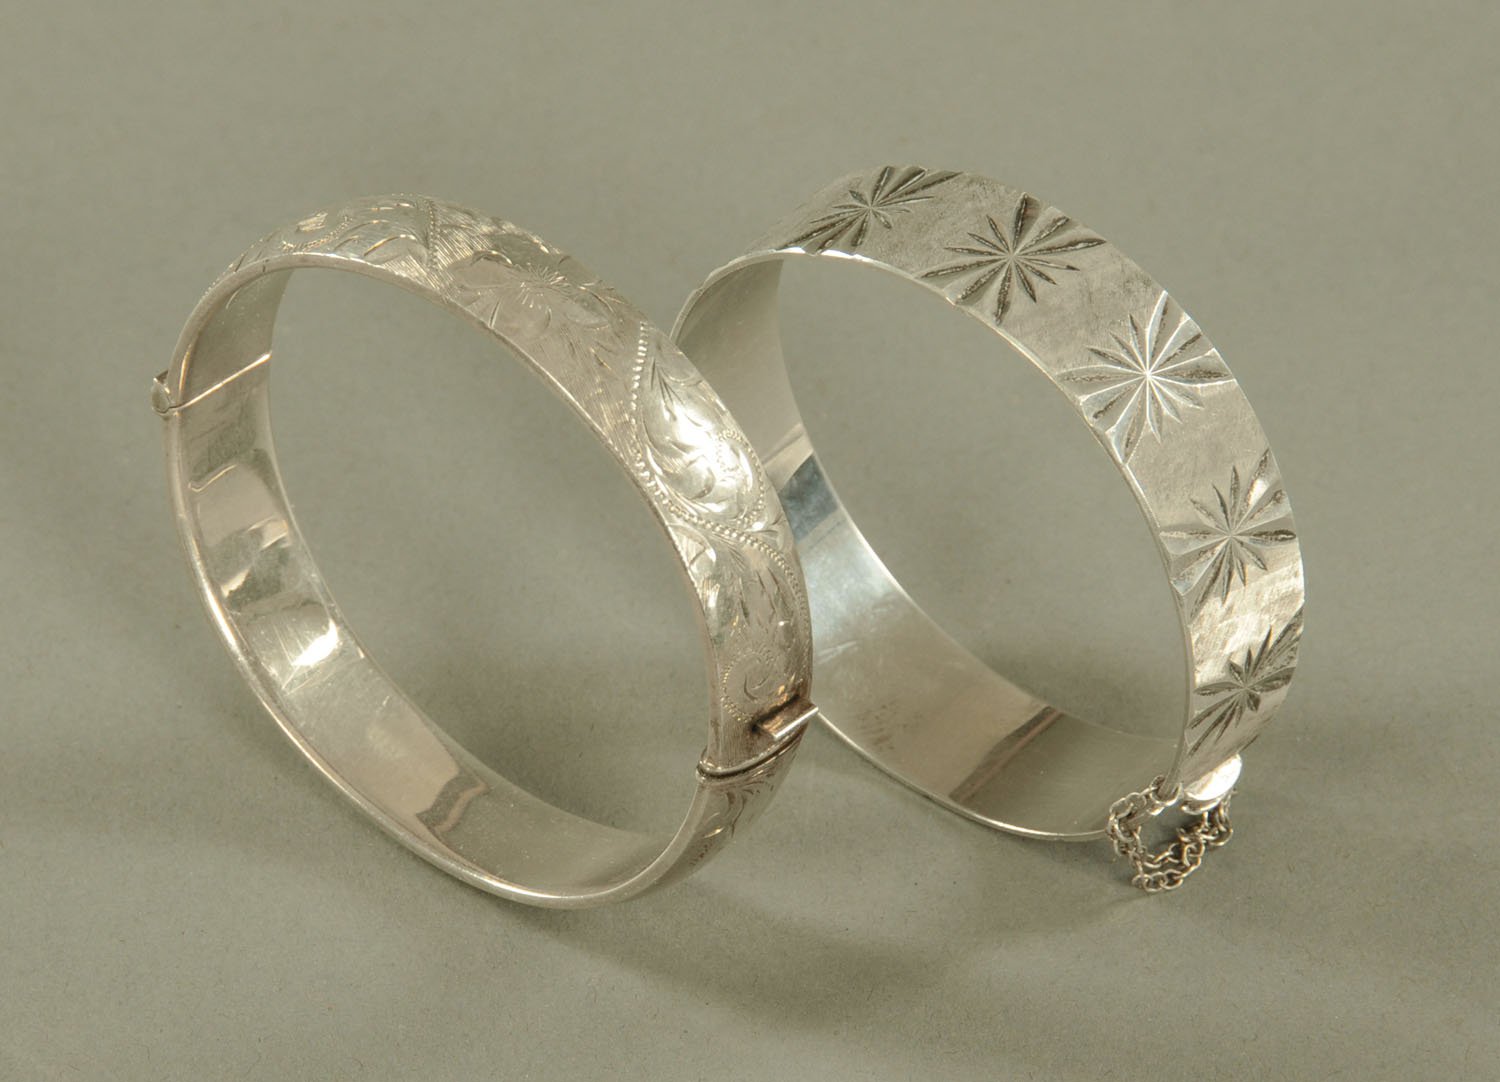 Two engraved silver bangles.